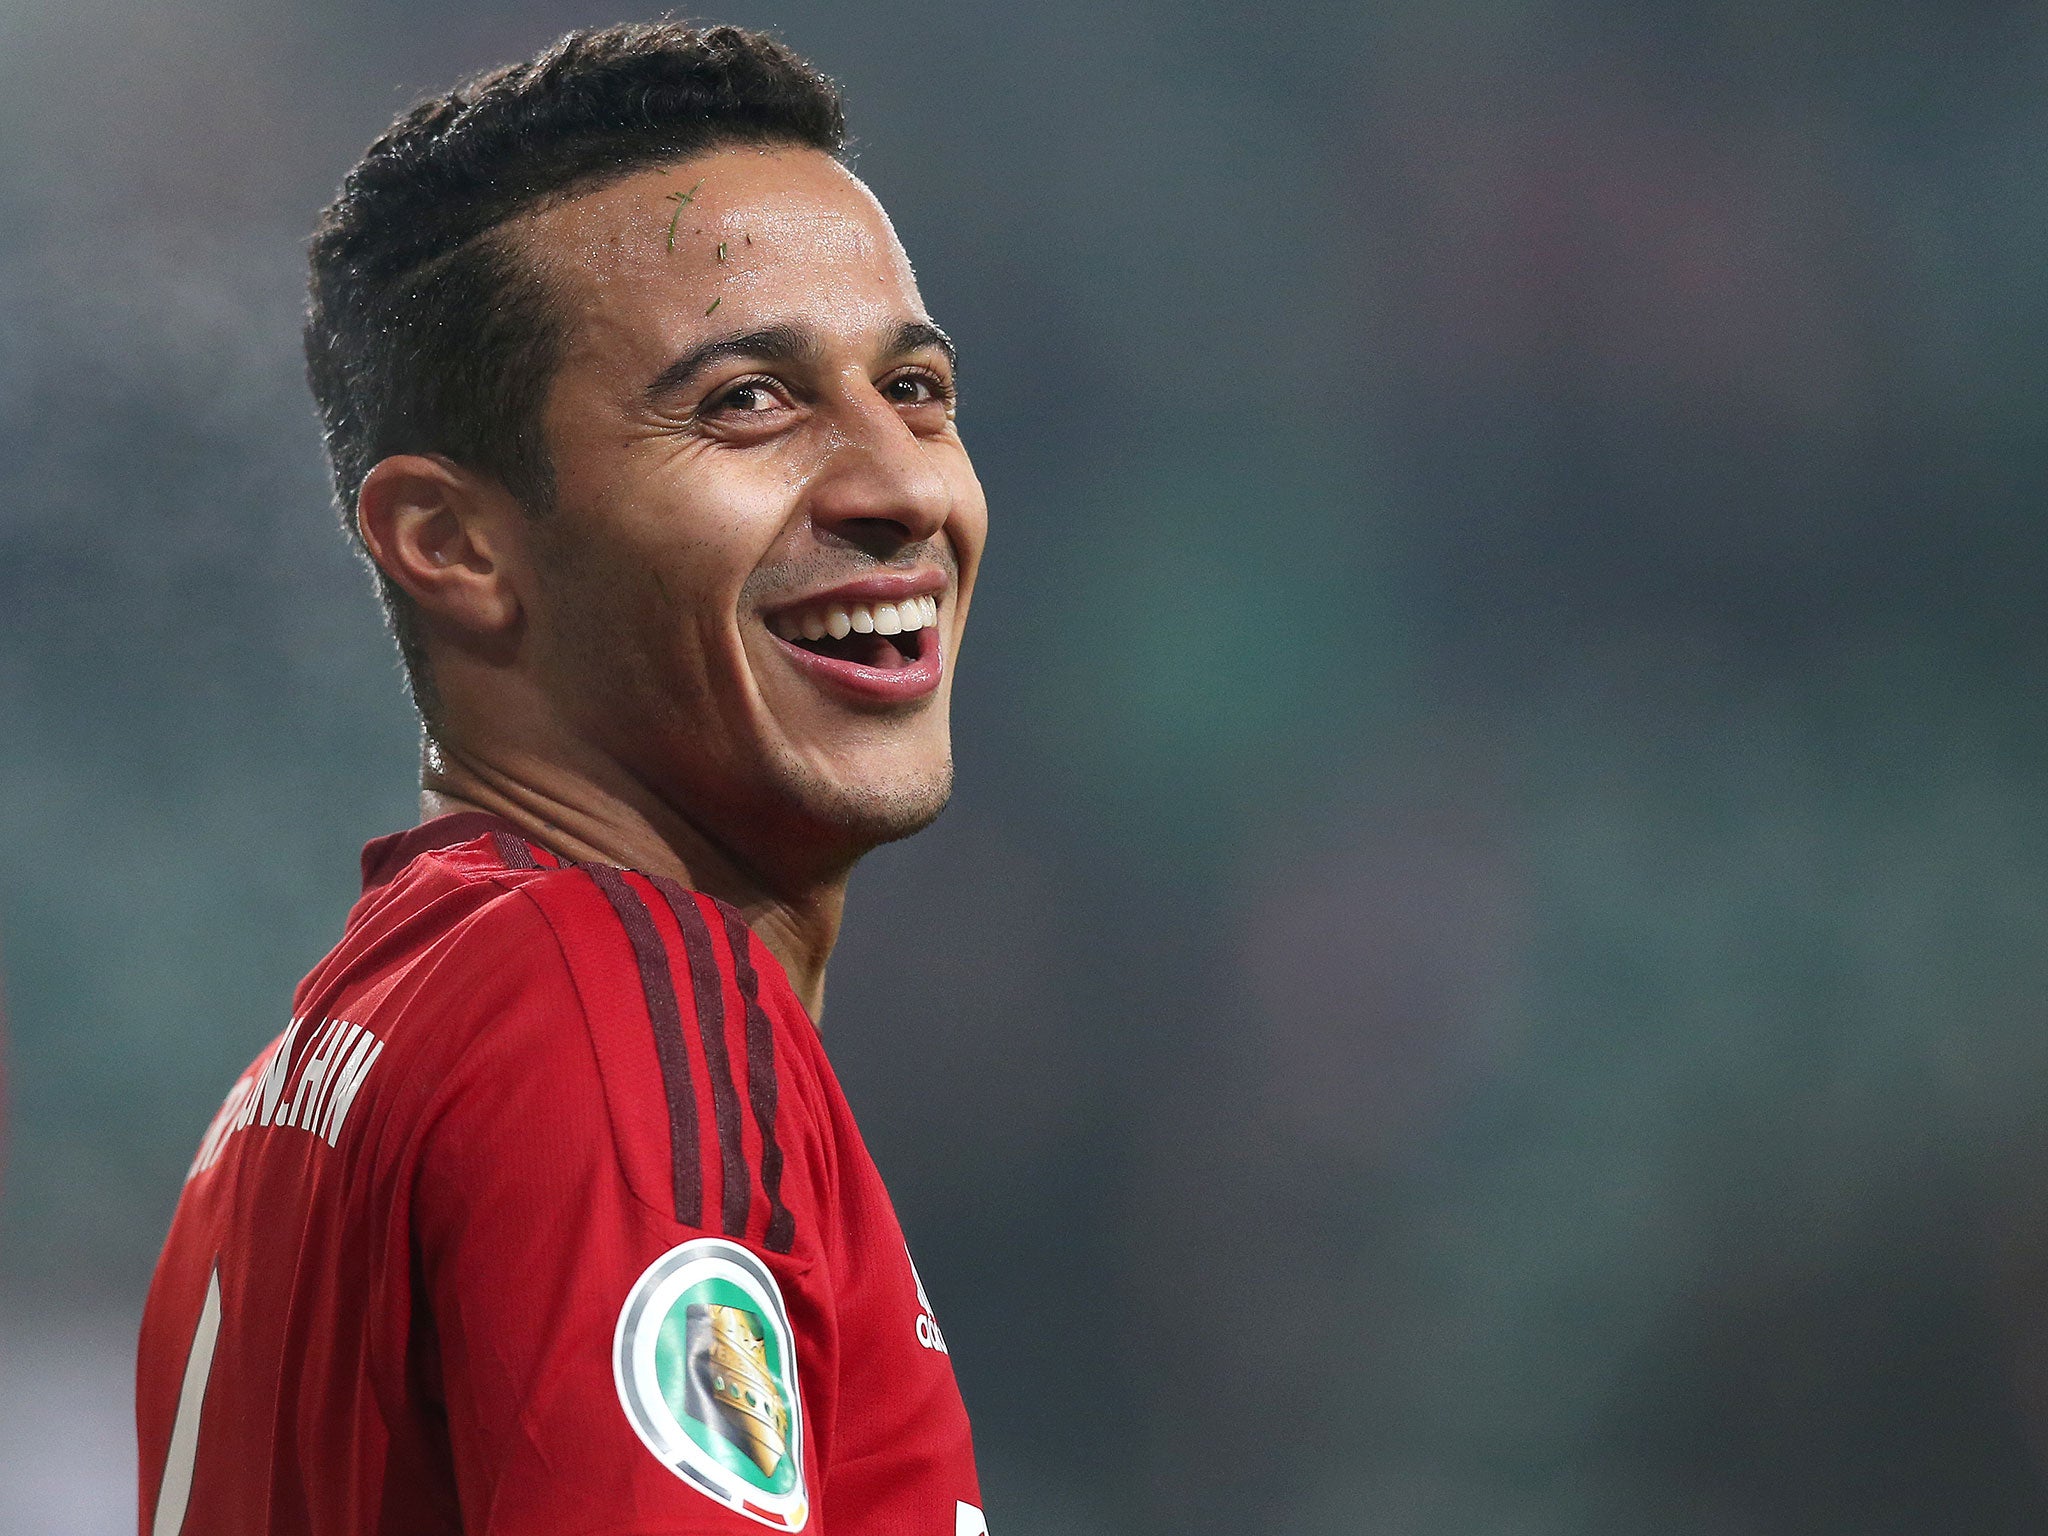 Live broadcast of Liverpool transfer news: the latest news of Thiago Alcantara, the links of Mohamed Salah and Giorinho Vinaldum with Barcelona, ​​in addition to the updates of the English Premier League.